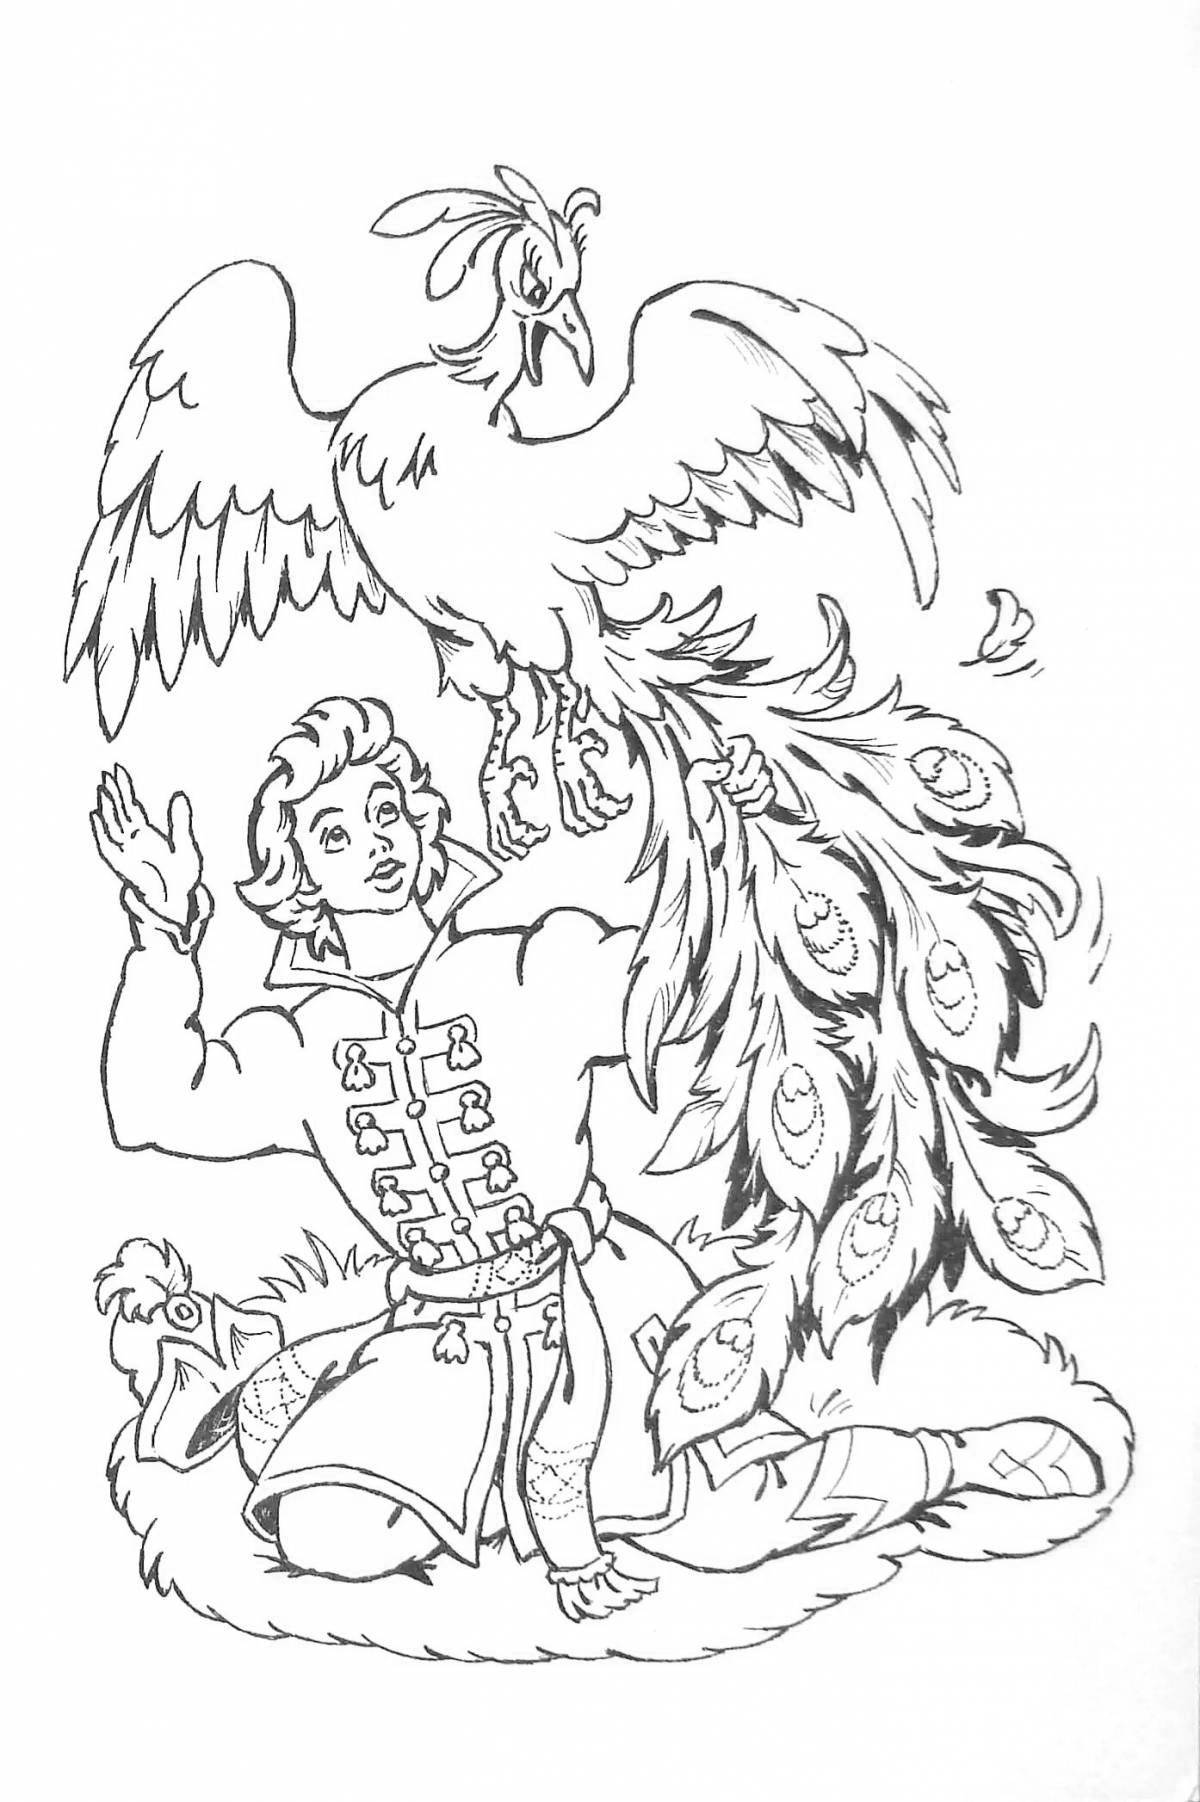 Inviting coloring book based on Pushkin's fairy tales